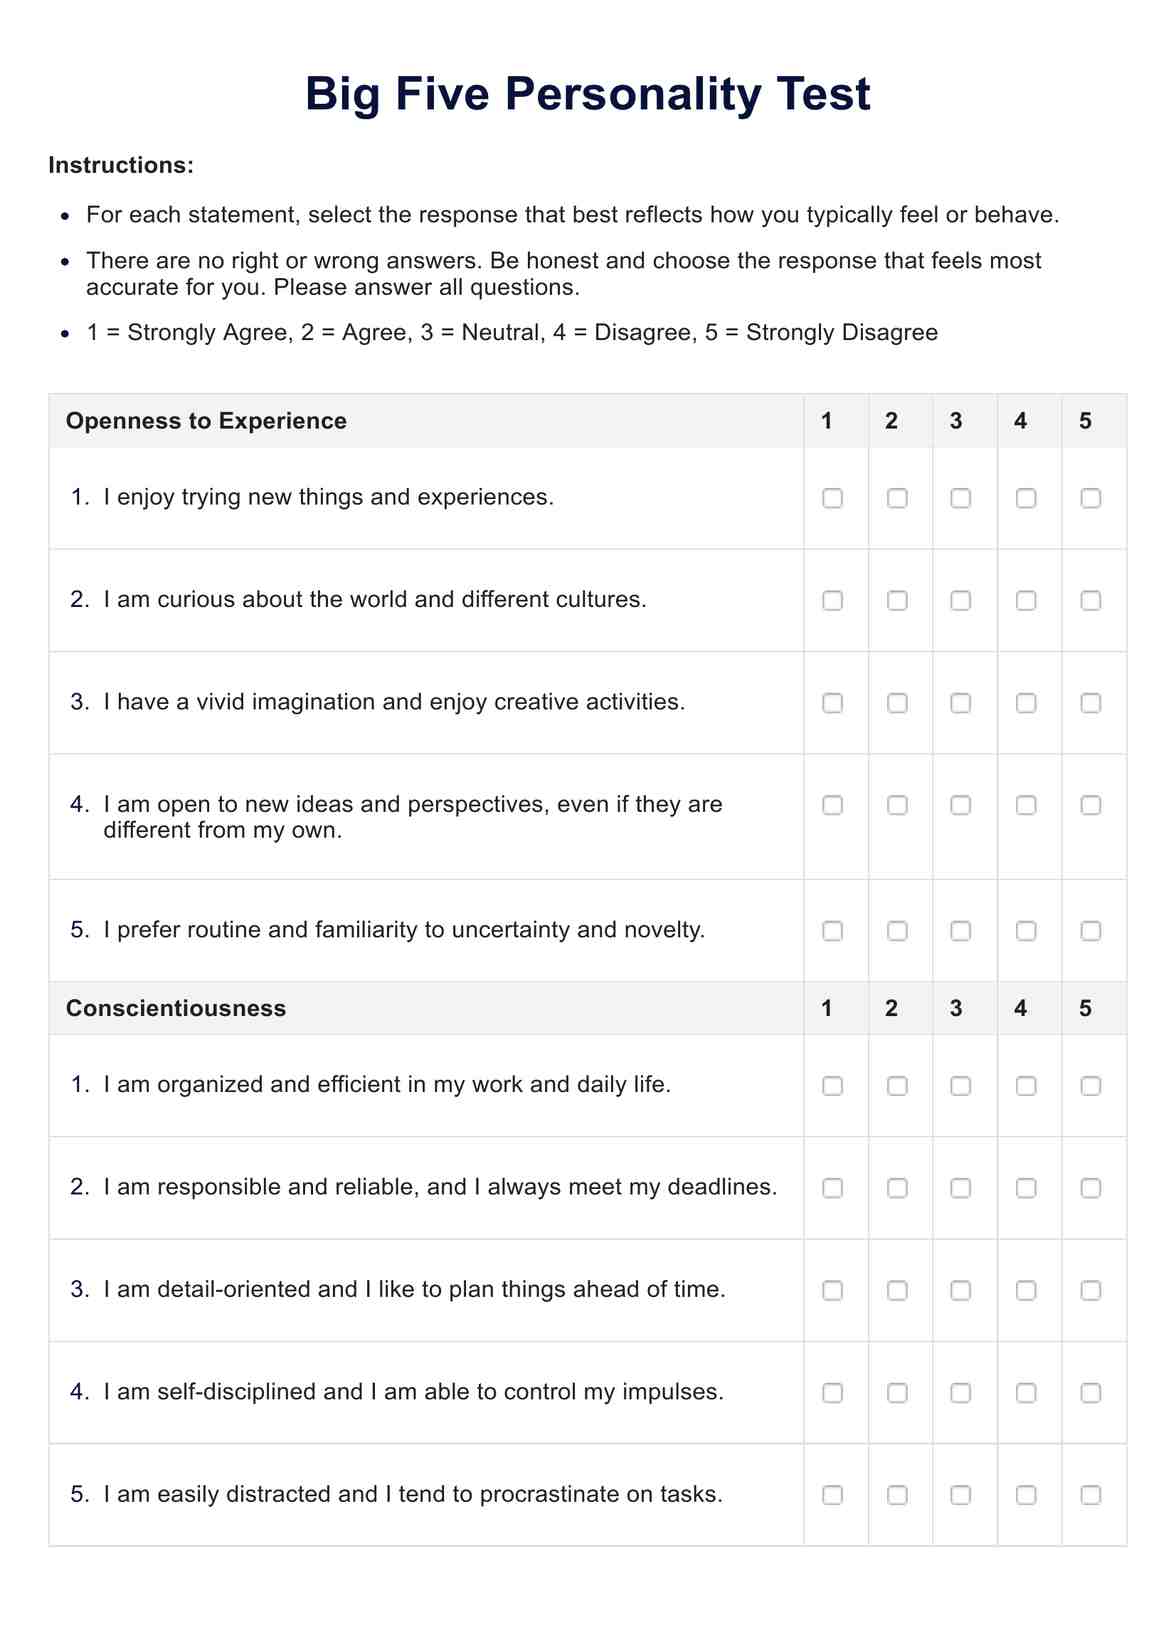 Big Five Personality Test PDF Example